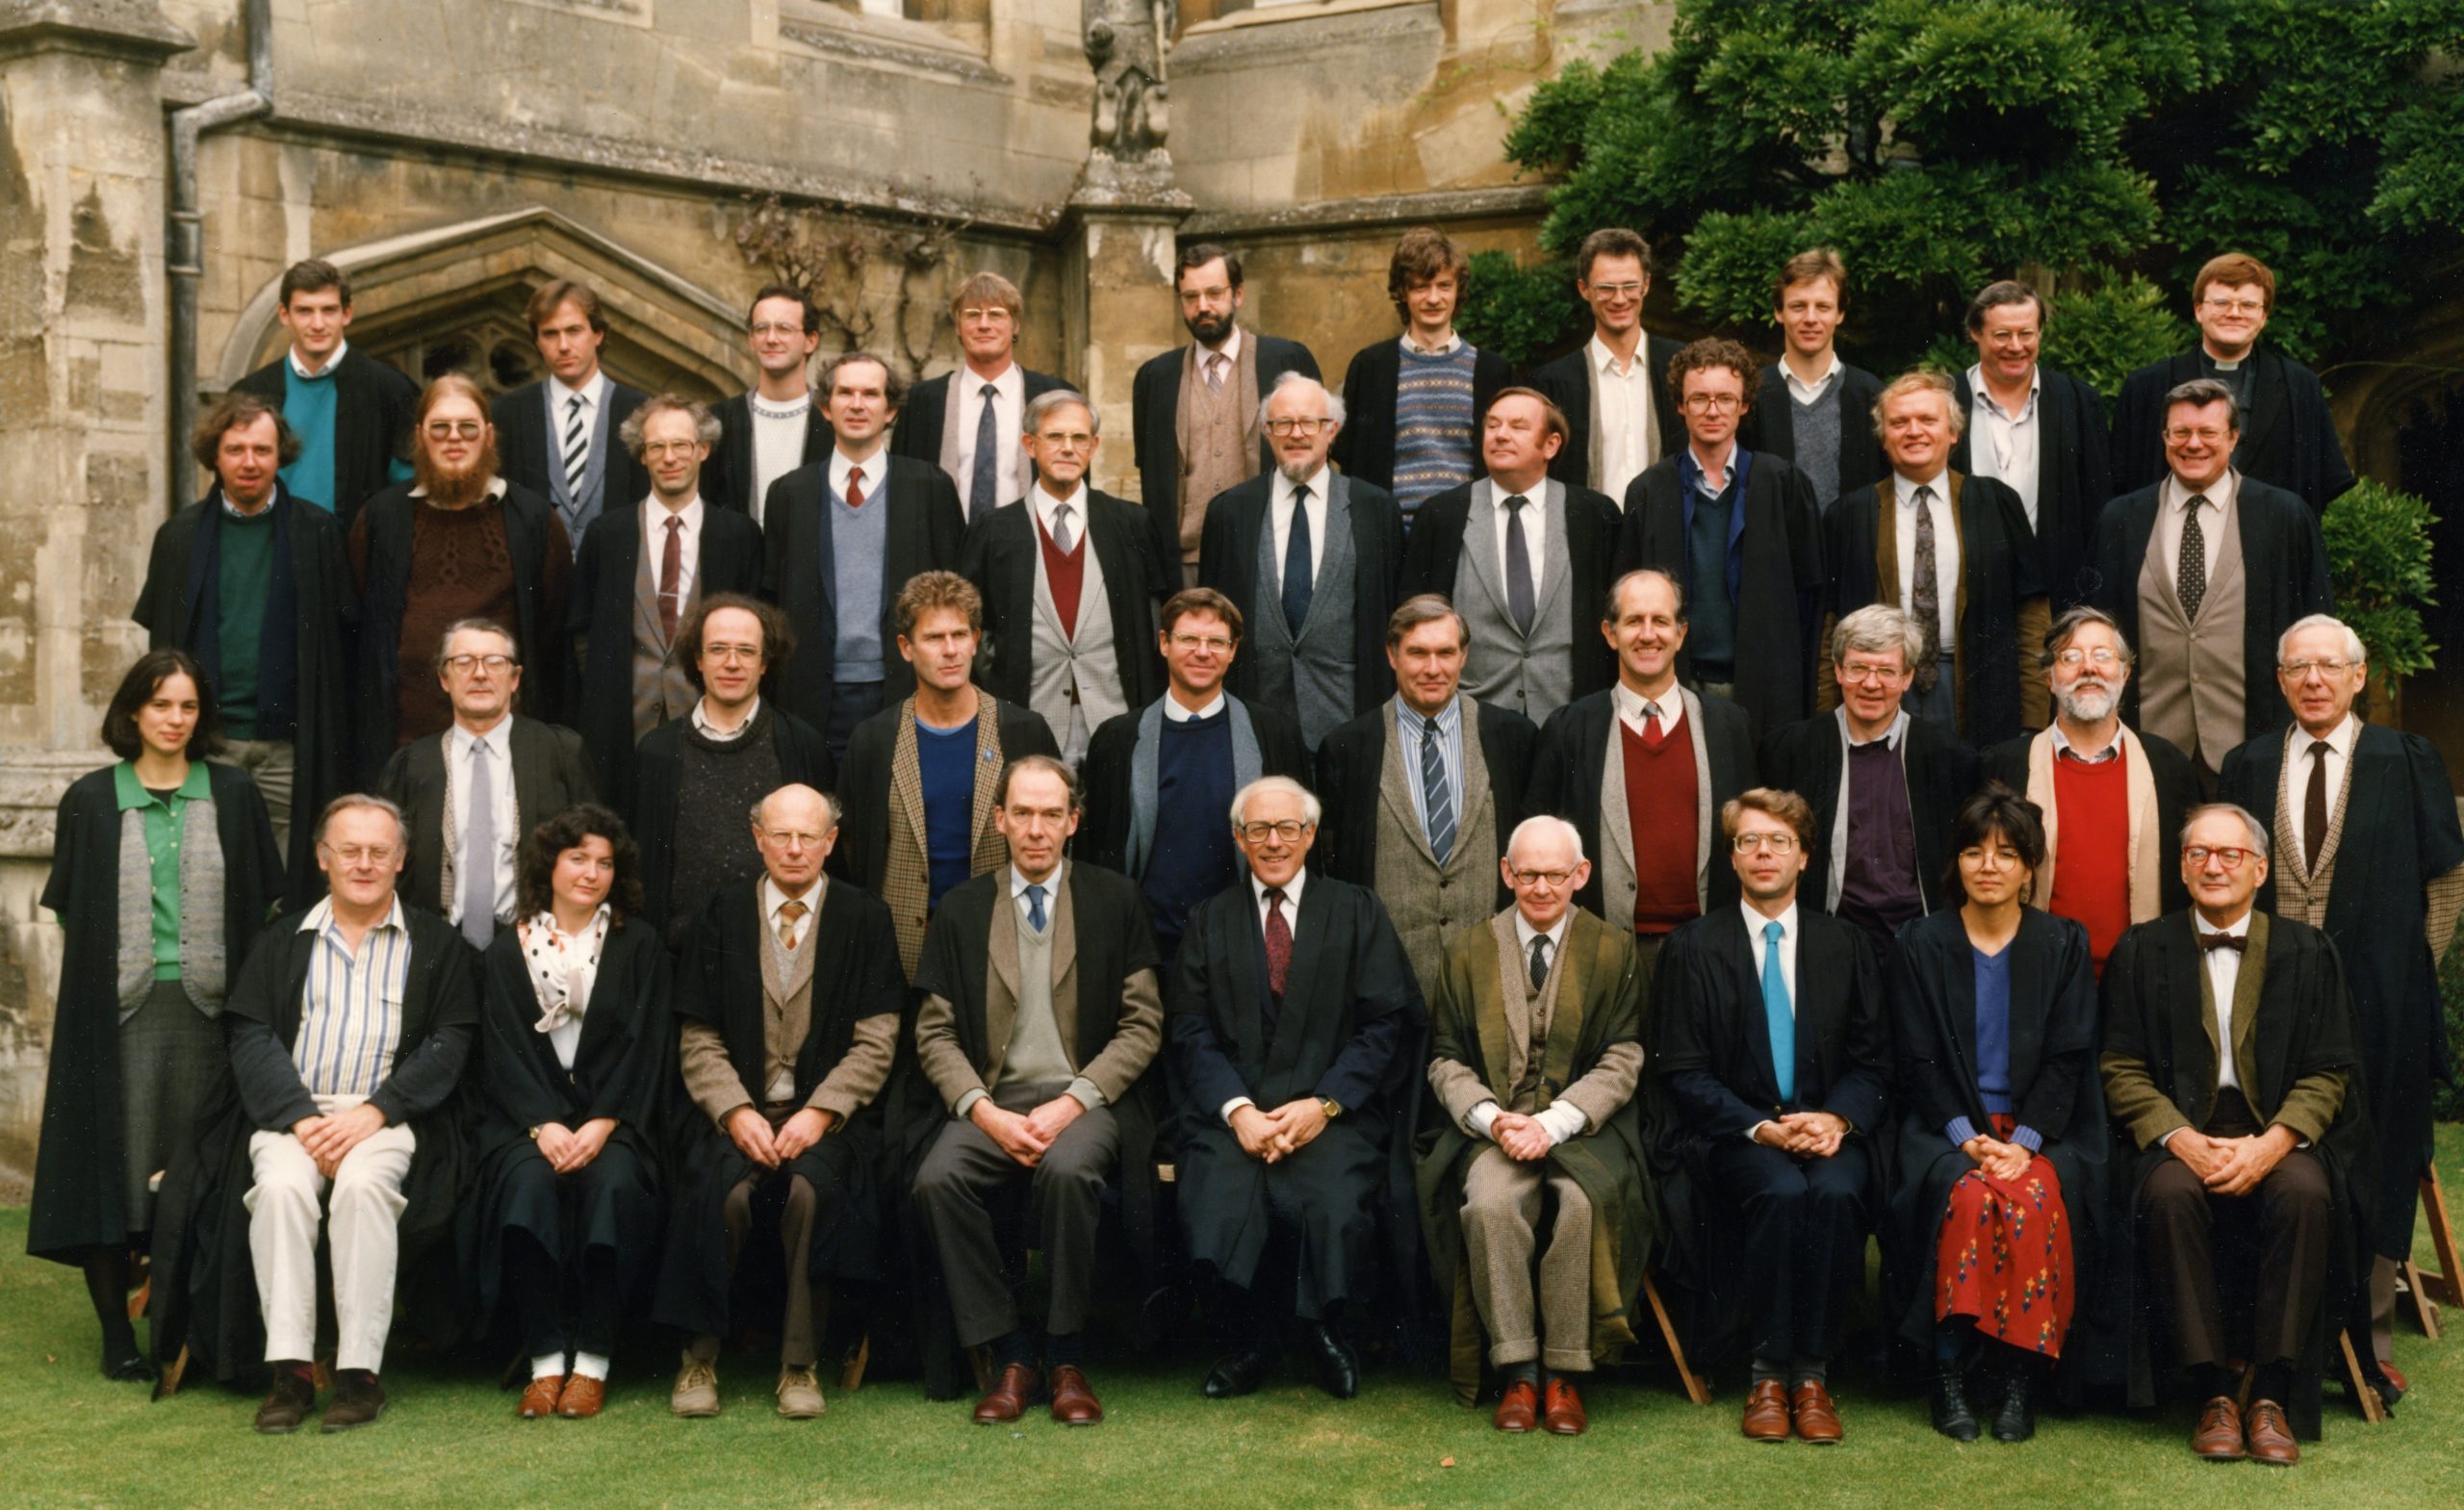 Colour photograph of around 40 Magdalen Fellows standing in 4 rows. They are all white men, with the exception of 3 women. One of the women is Beth Okamura.